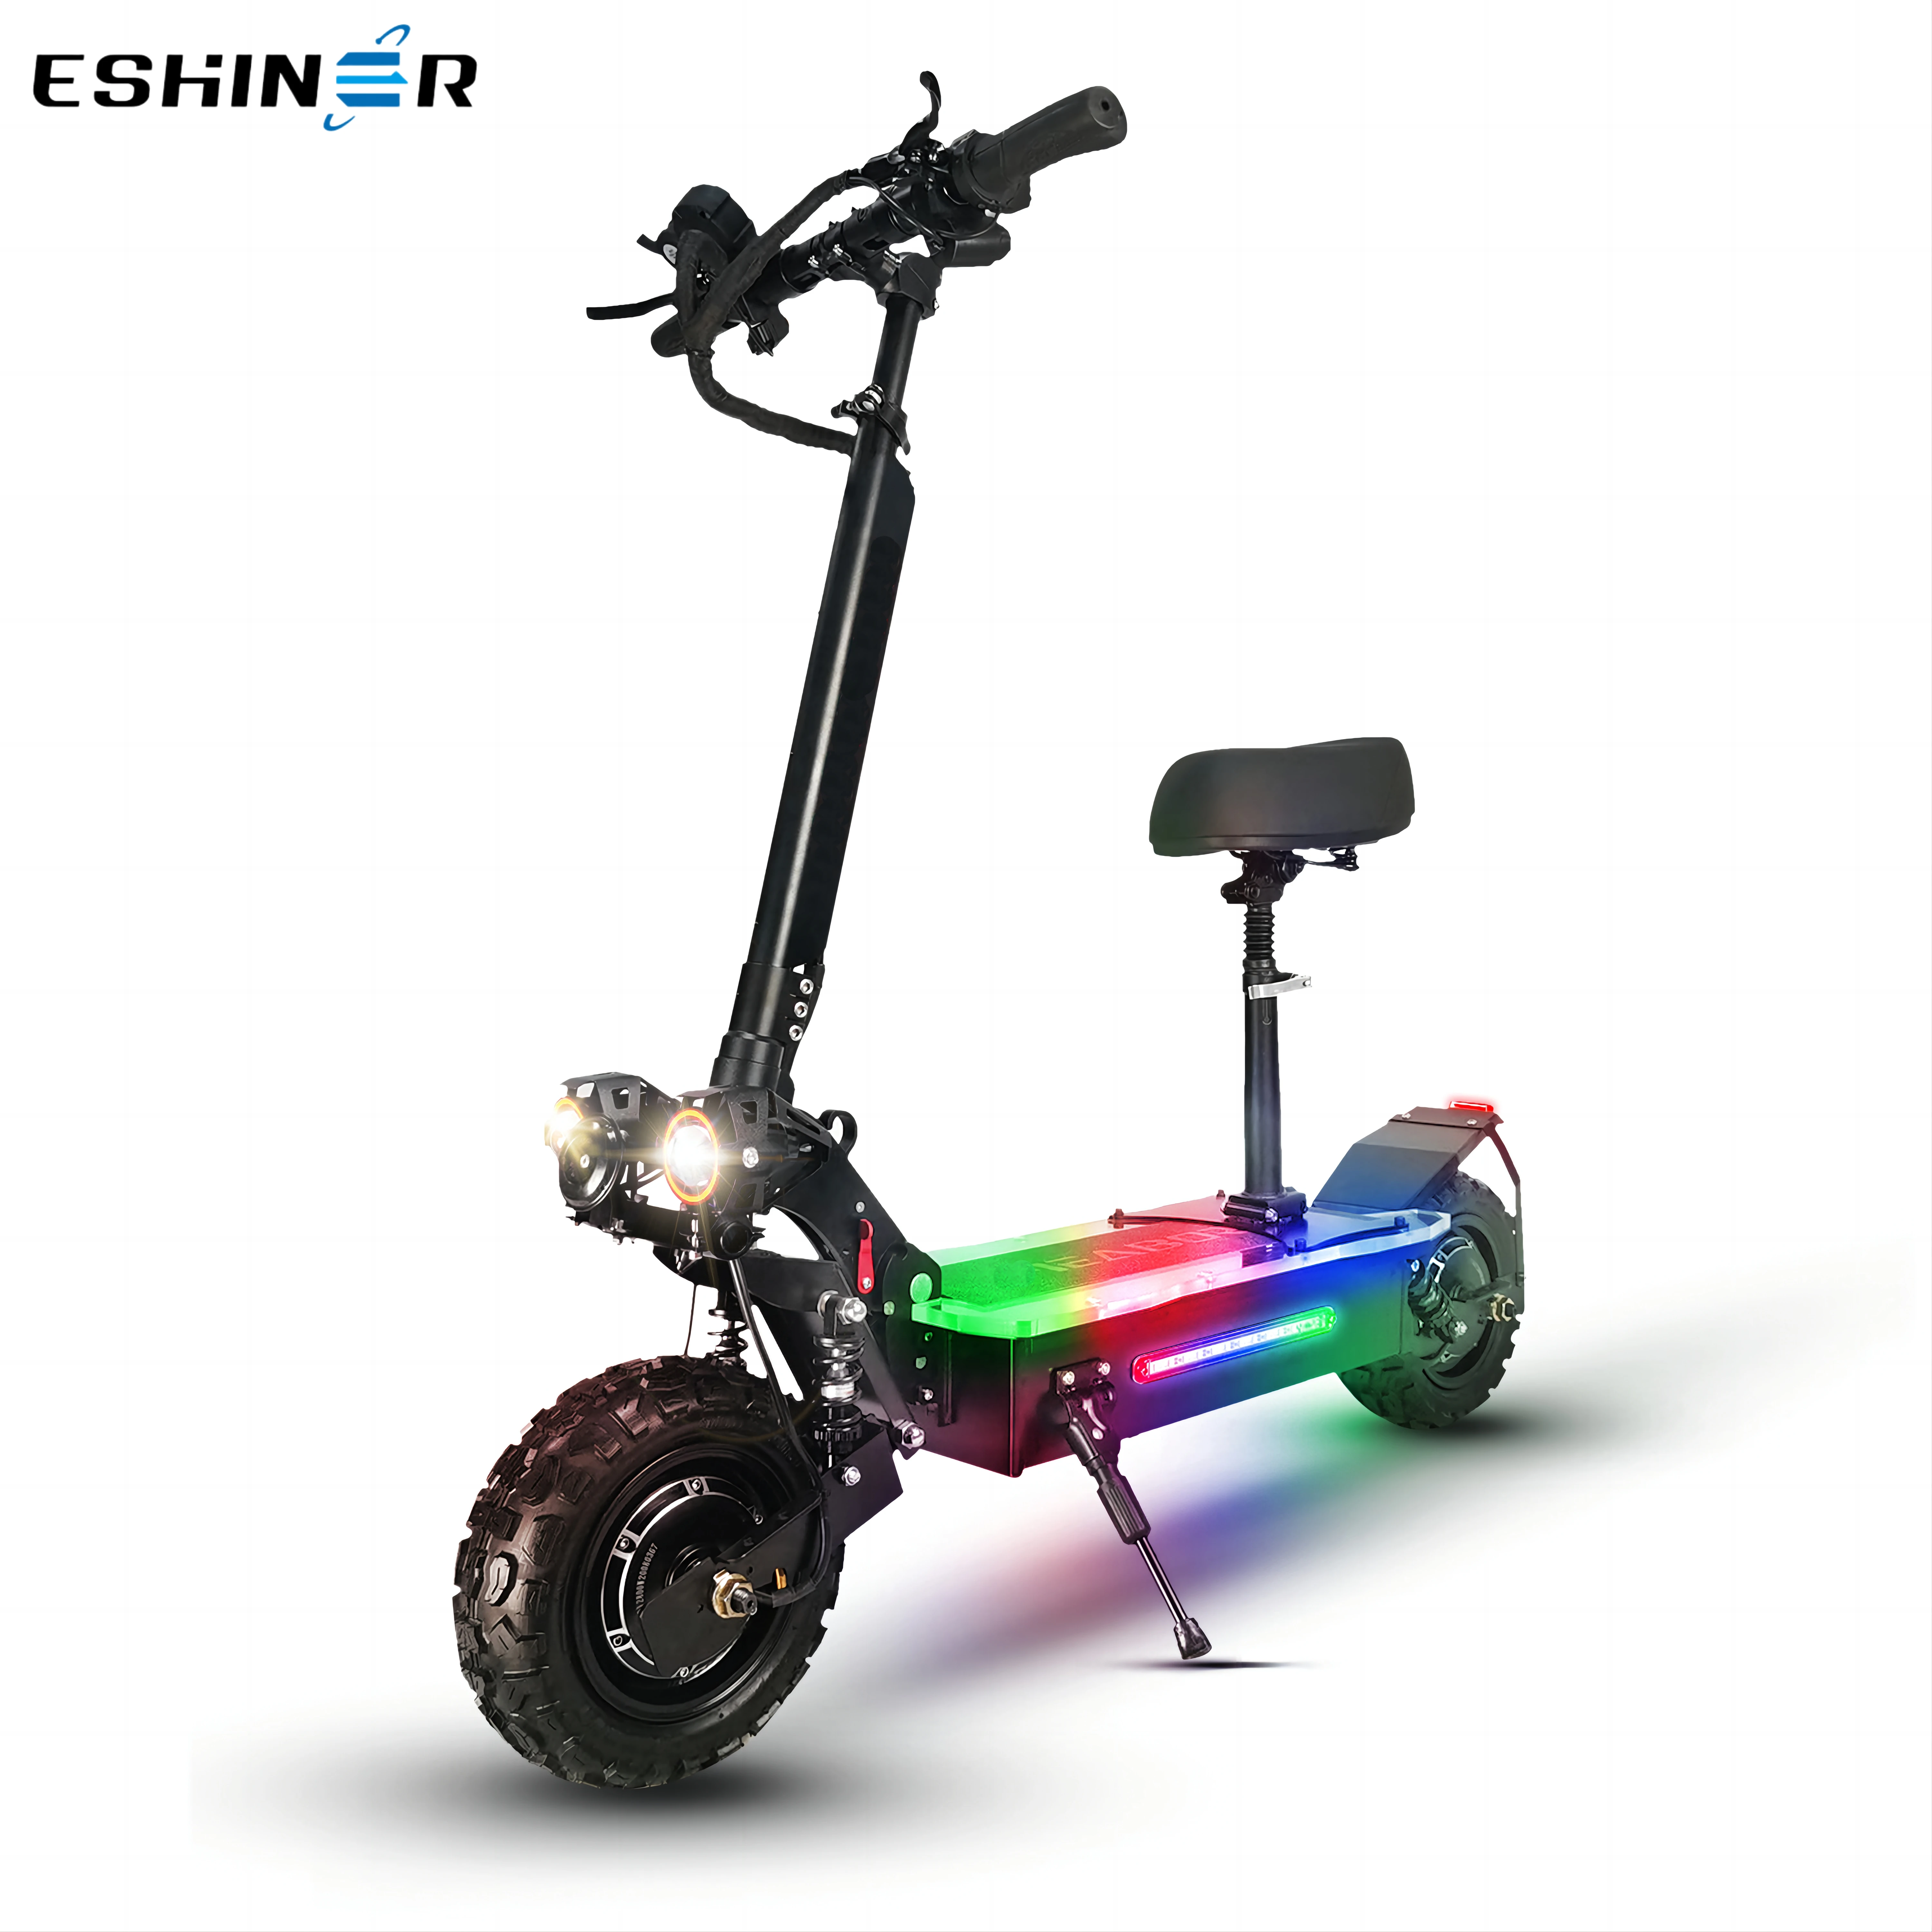 

Foldable long range max speed 70-80km/h 5600w 60v dual motor 11 inch off road two wheel electric scooter with seat for adults